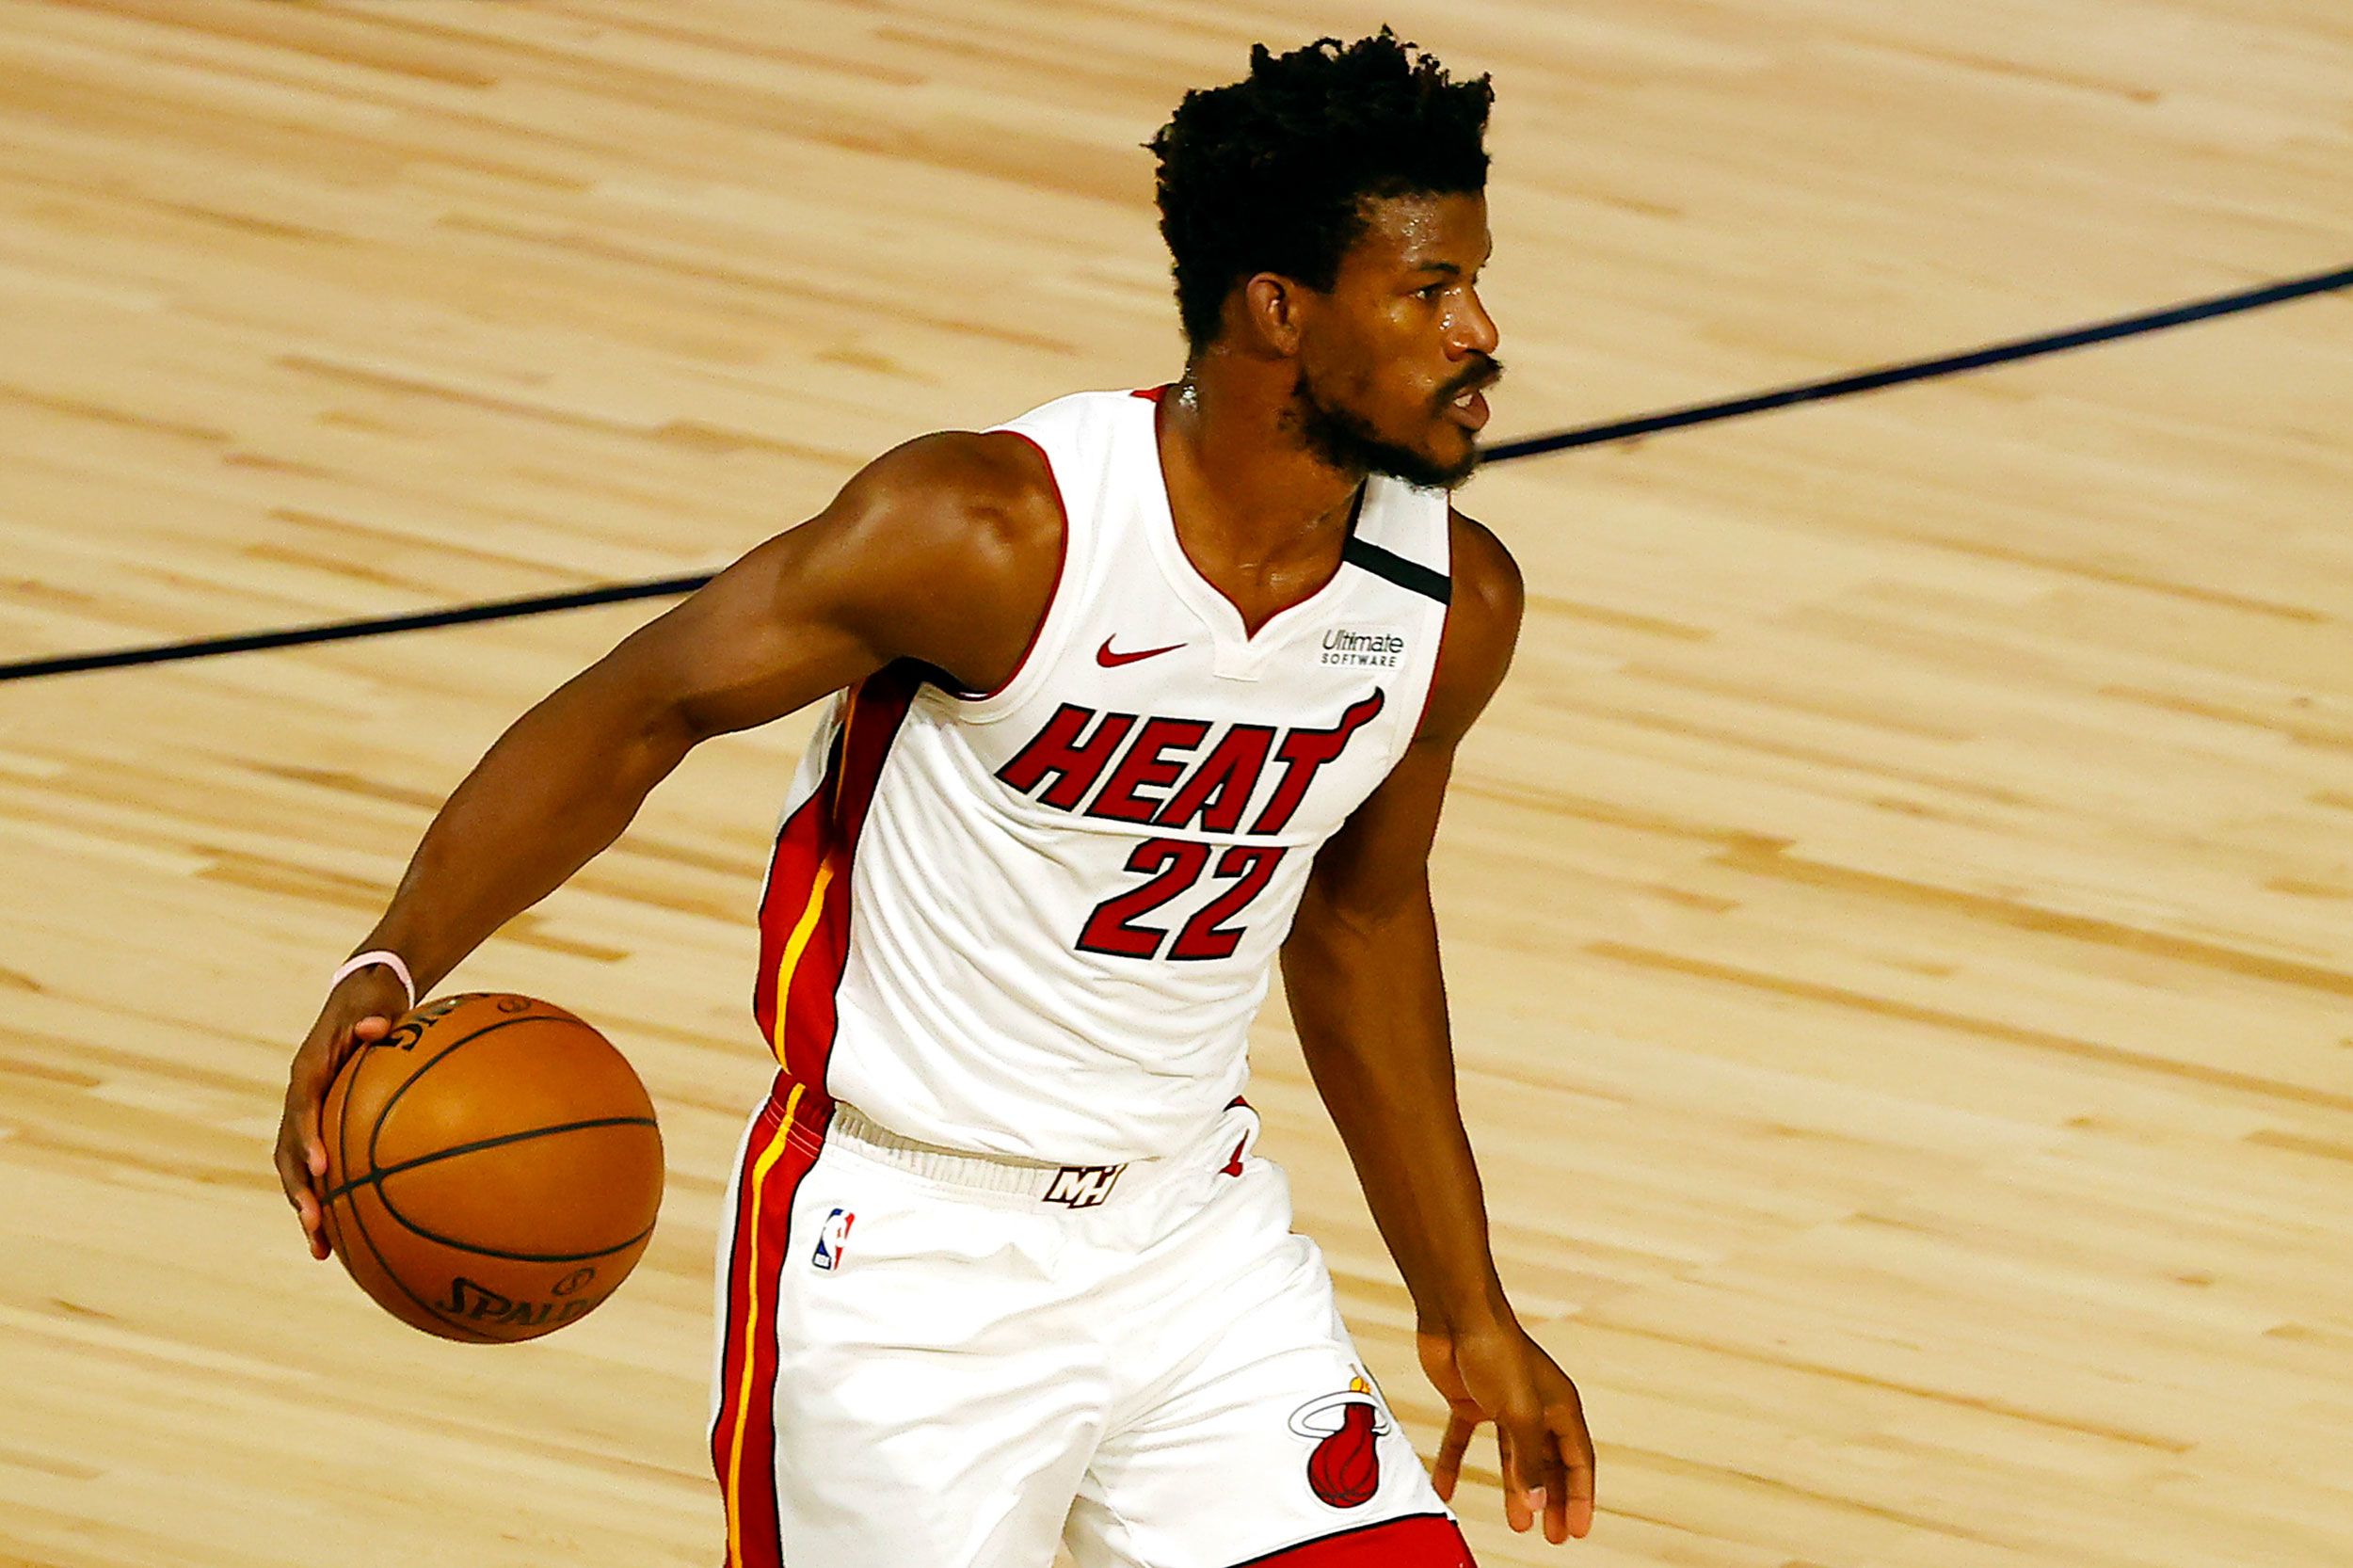 Report: Jimmy Butler led Miami Heat players to confront Denver Nuggets  after game before security intervened - Heat Nation